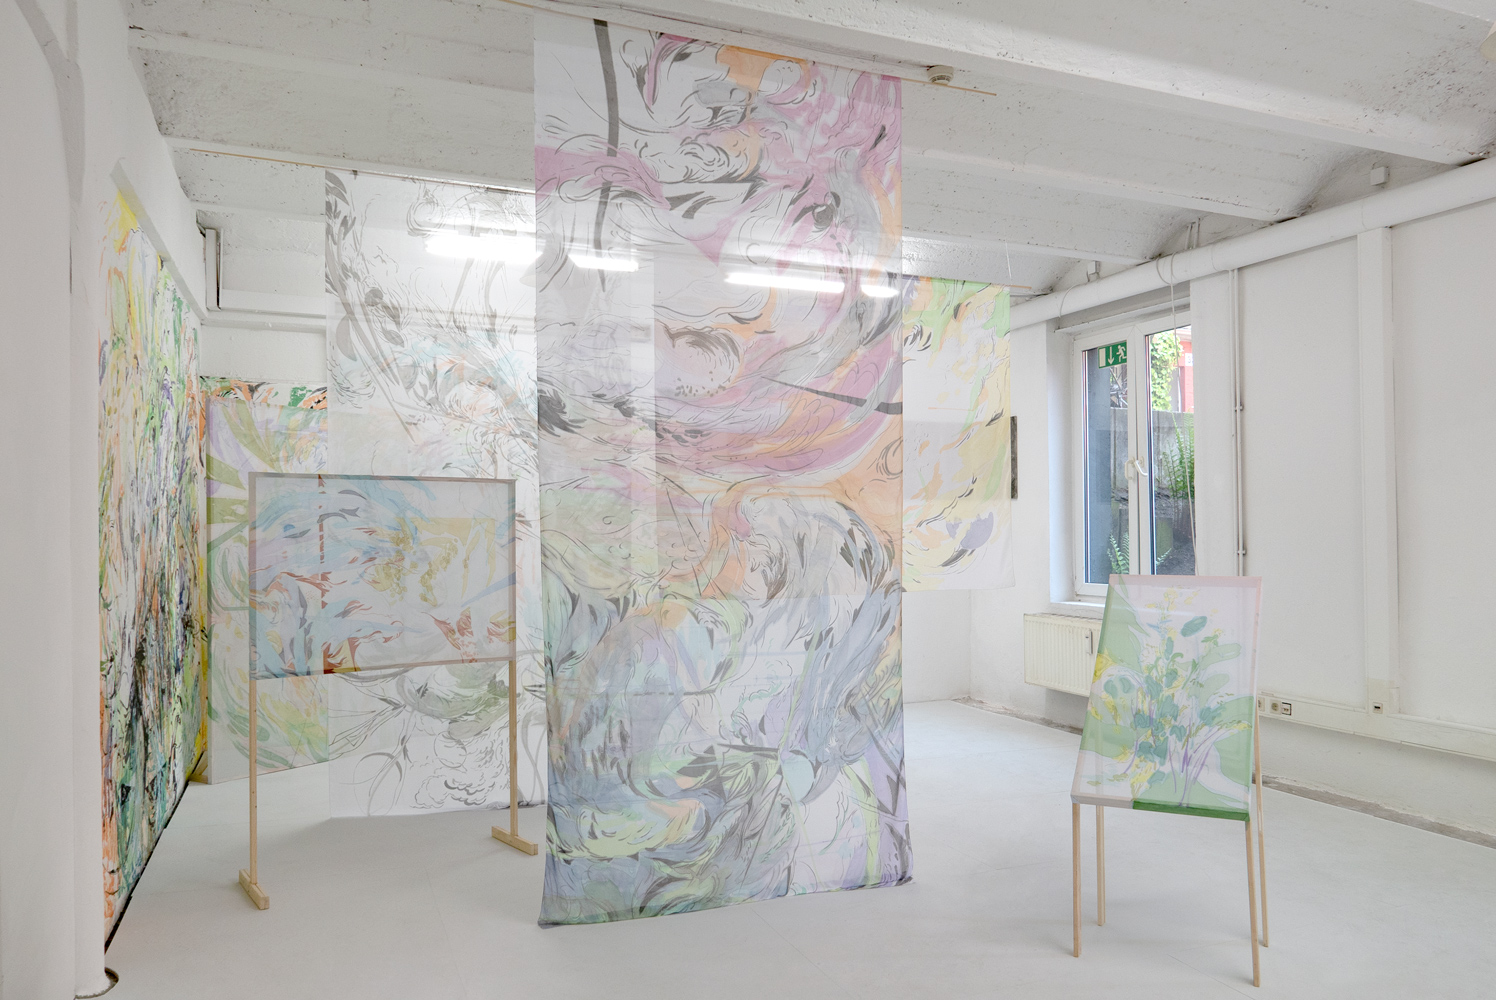 Installation work of colorful improvised drawings on six chiffon fabrics and a wall 